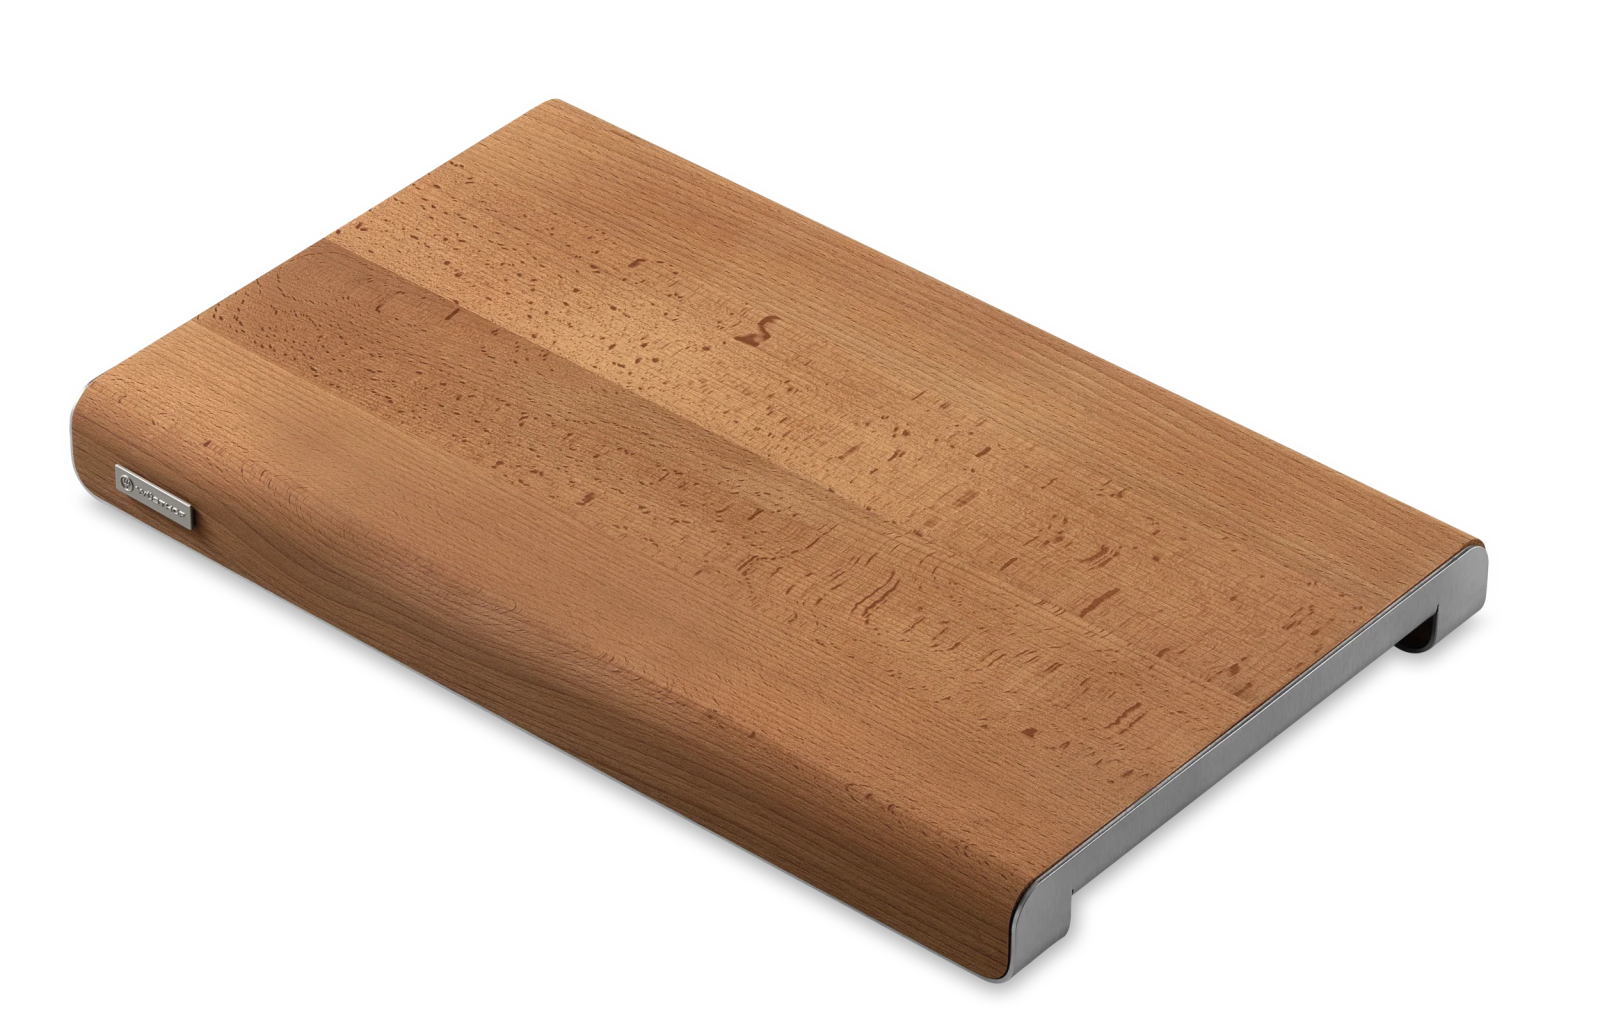 Wusthof Thermo Beech Cutting Board 40cm x 25cm - WT4159800202 - The Cotswold Knife Company